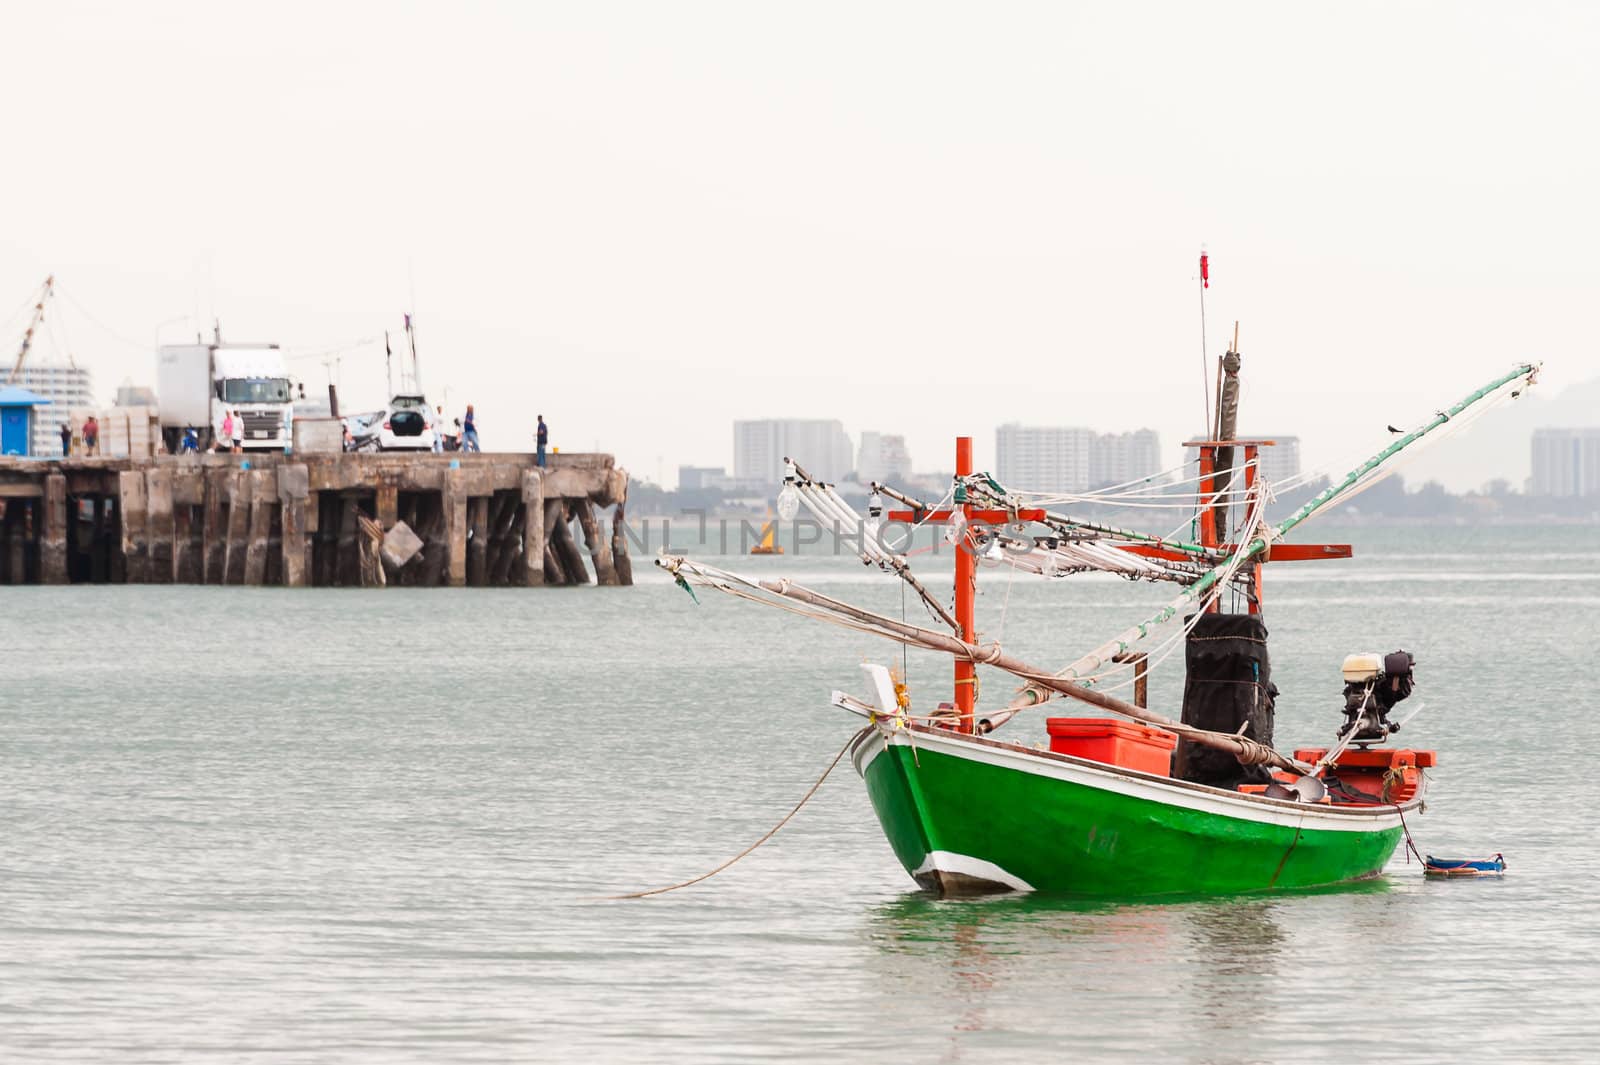 Green fishing boat thai on the sea in daylight time with jetty